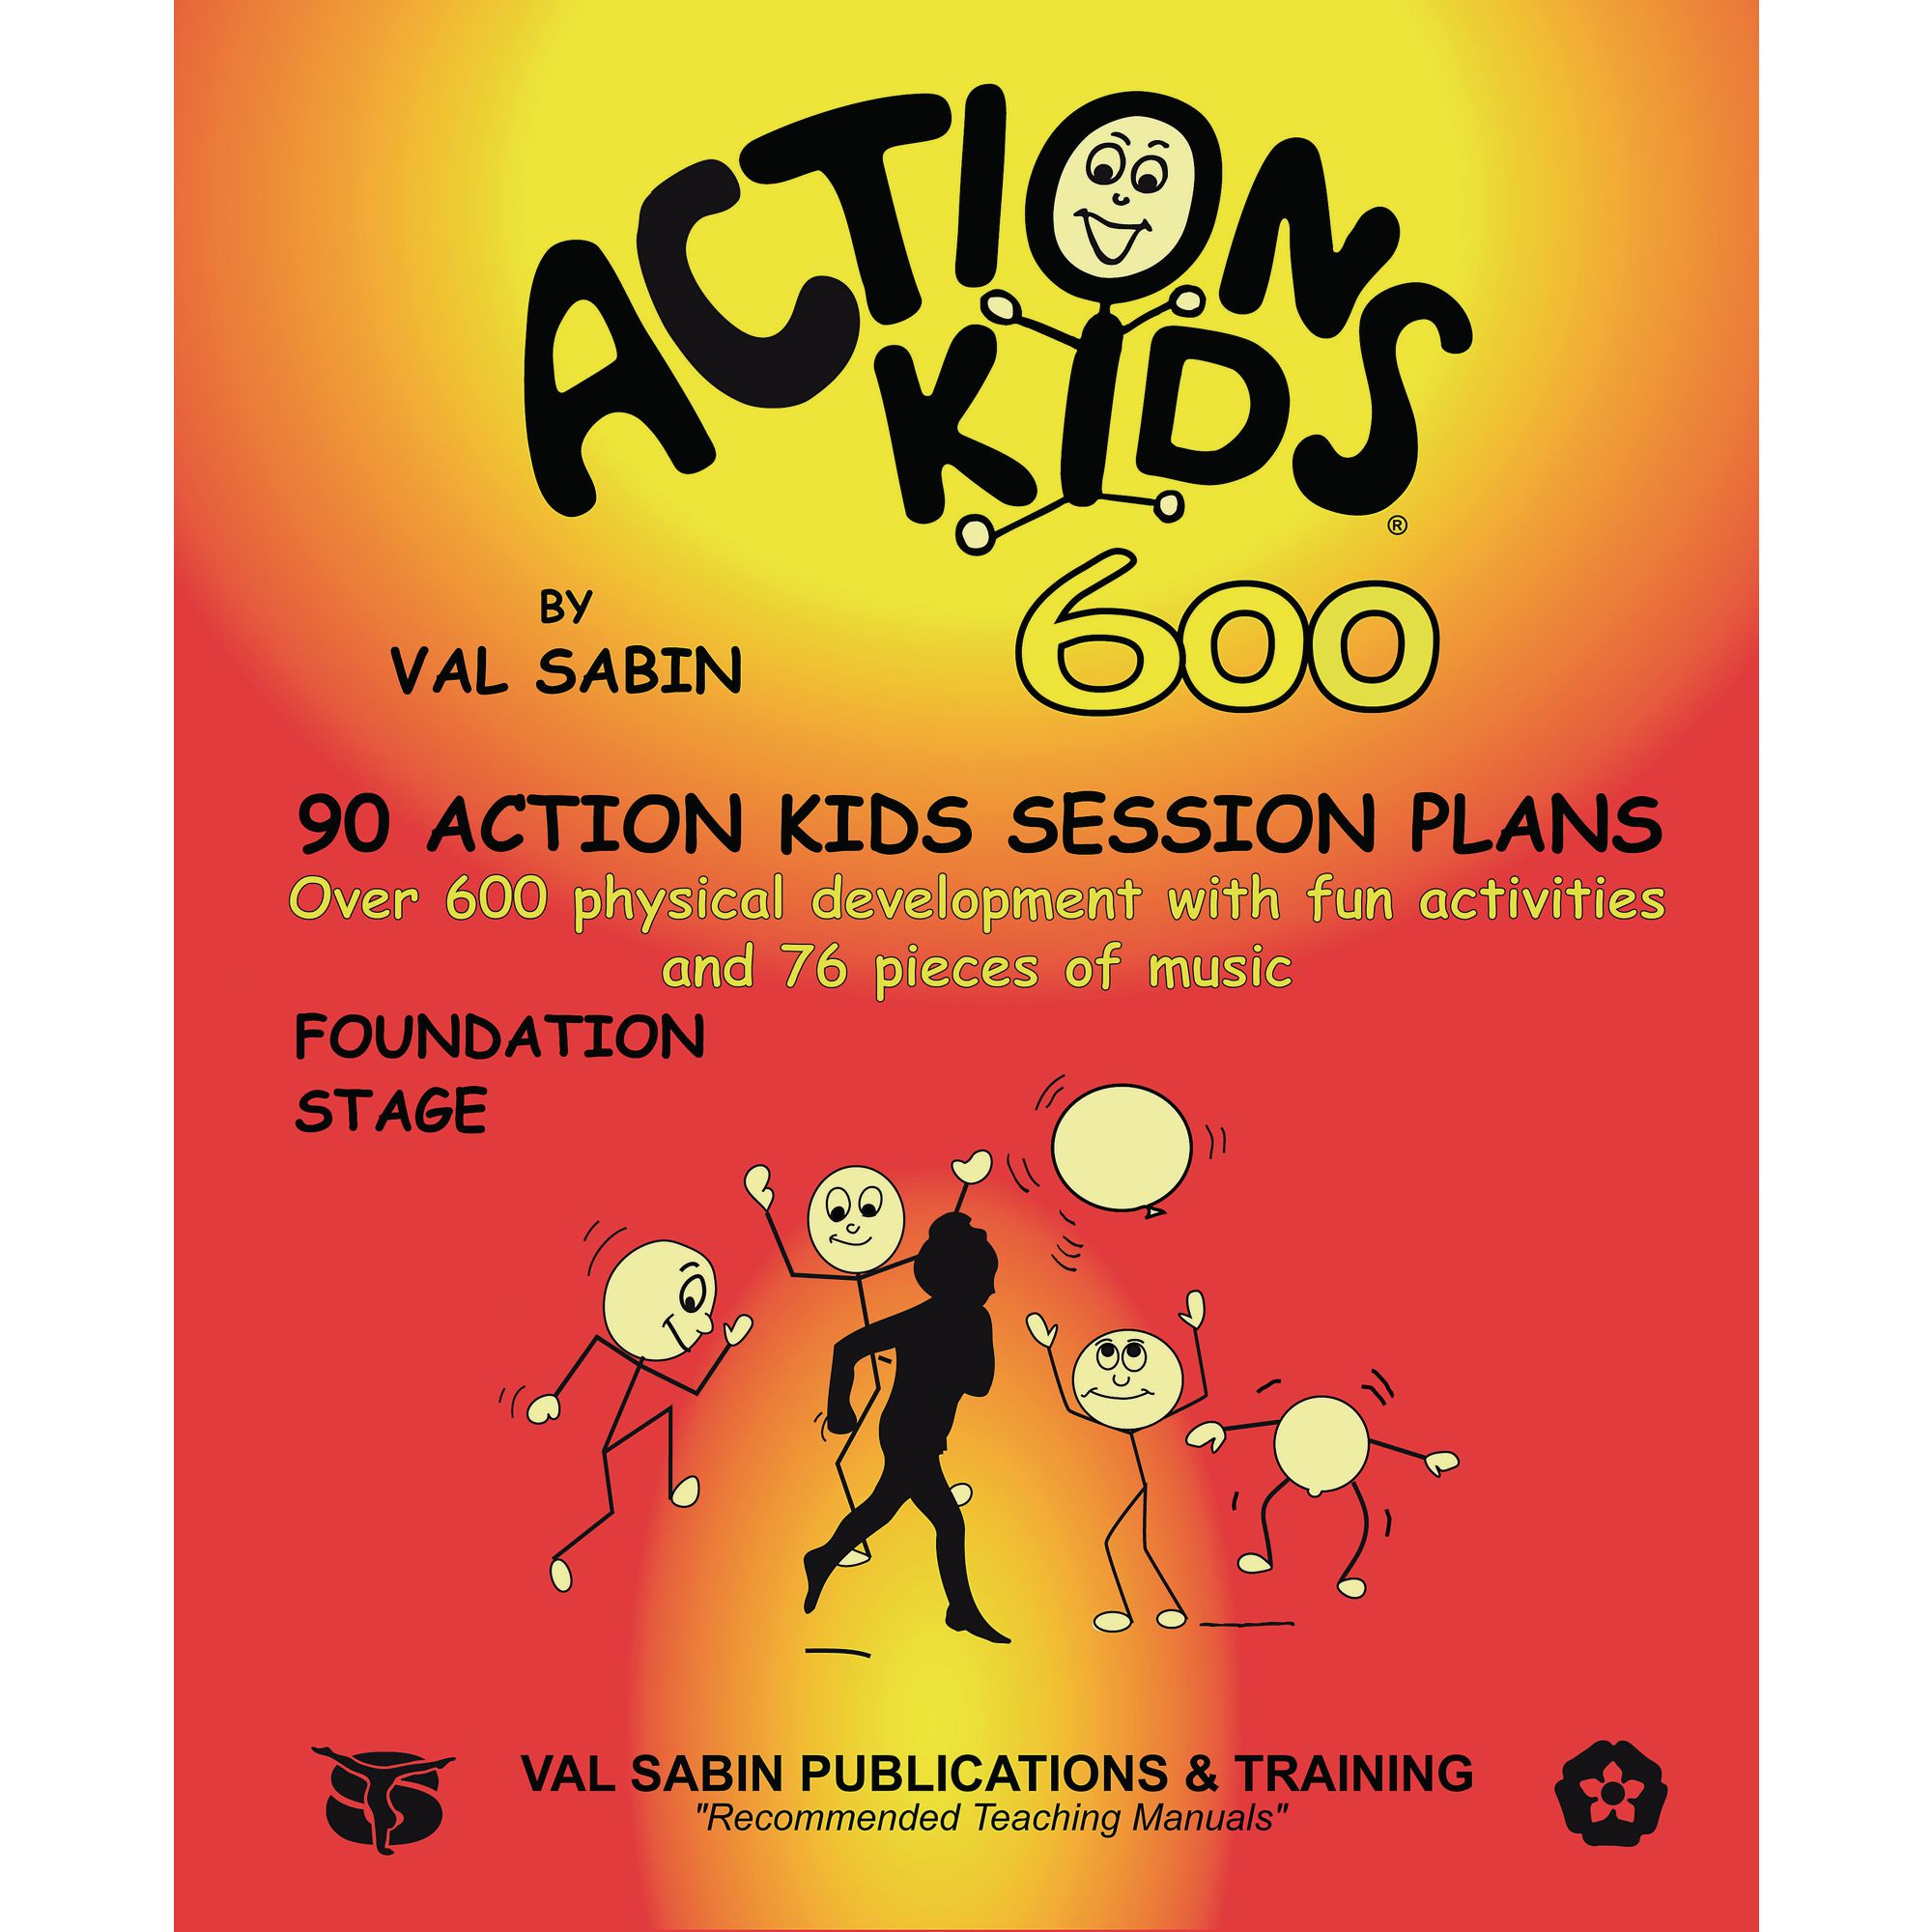 Action Kids 600